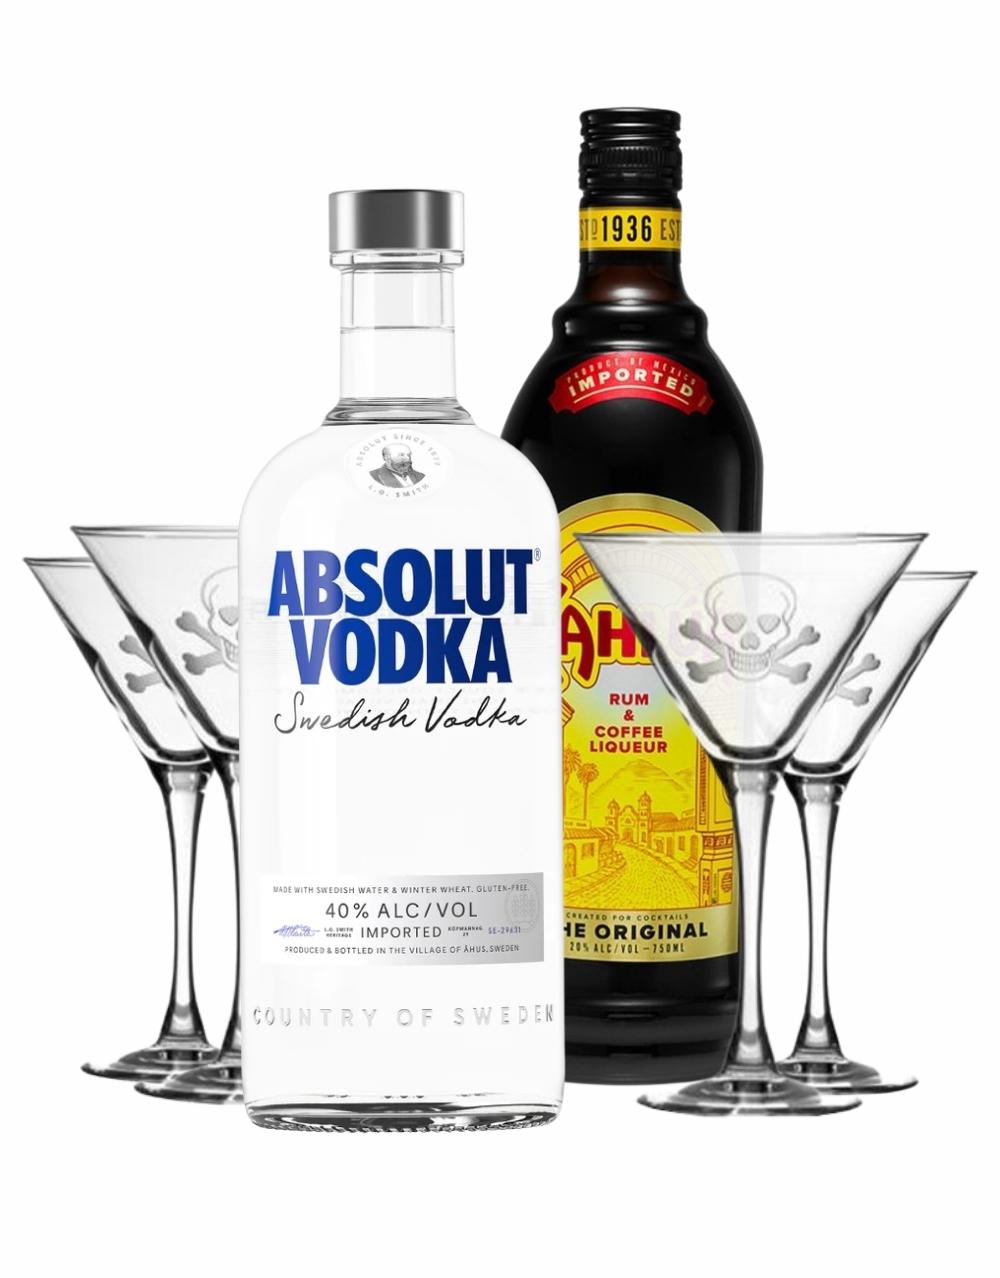 Absolut Vodka with Kahlúa Original and Rolf Skull and Cross Bones Martini